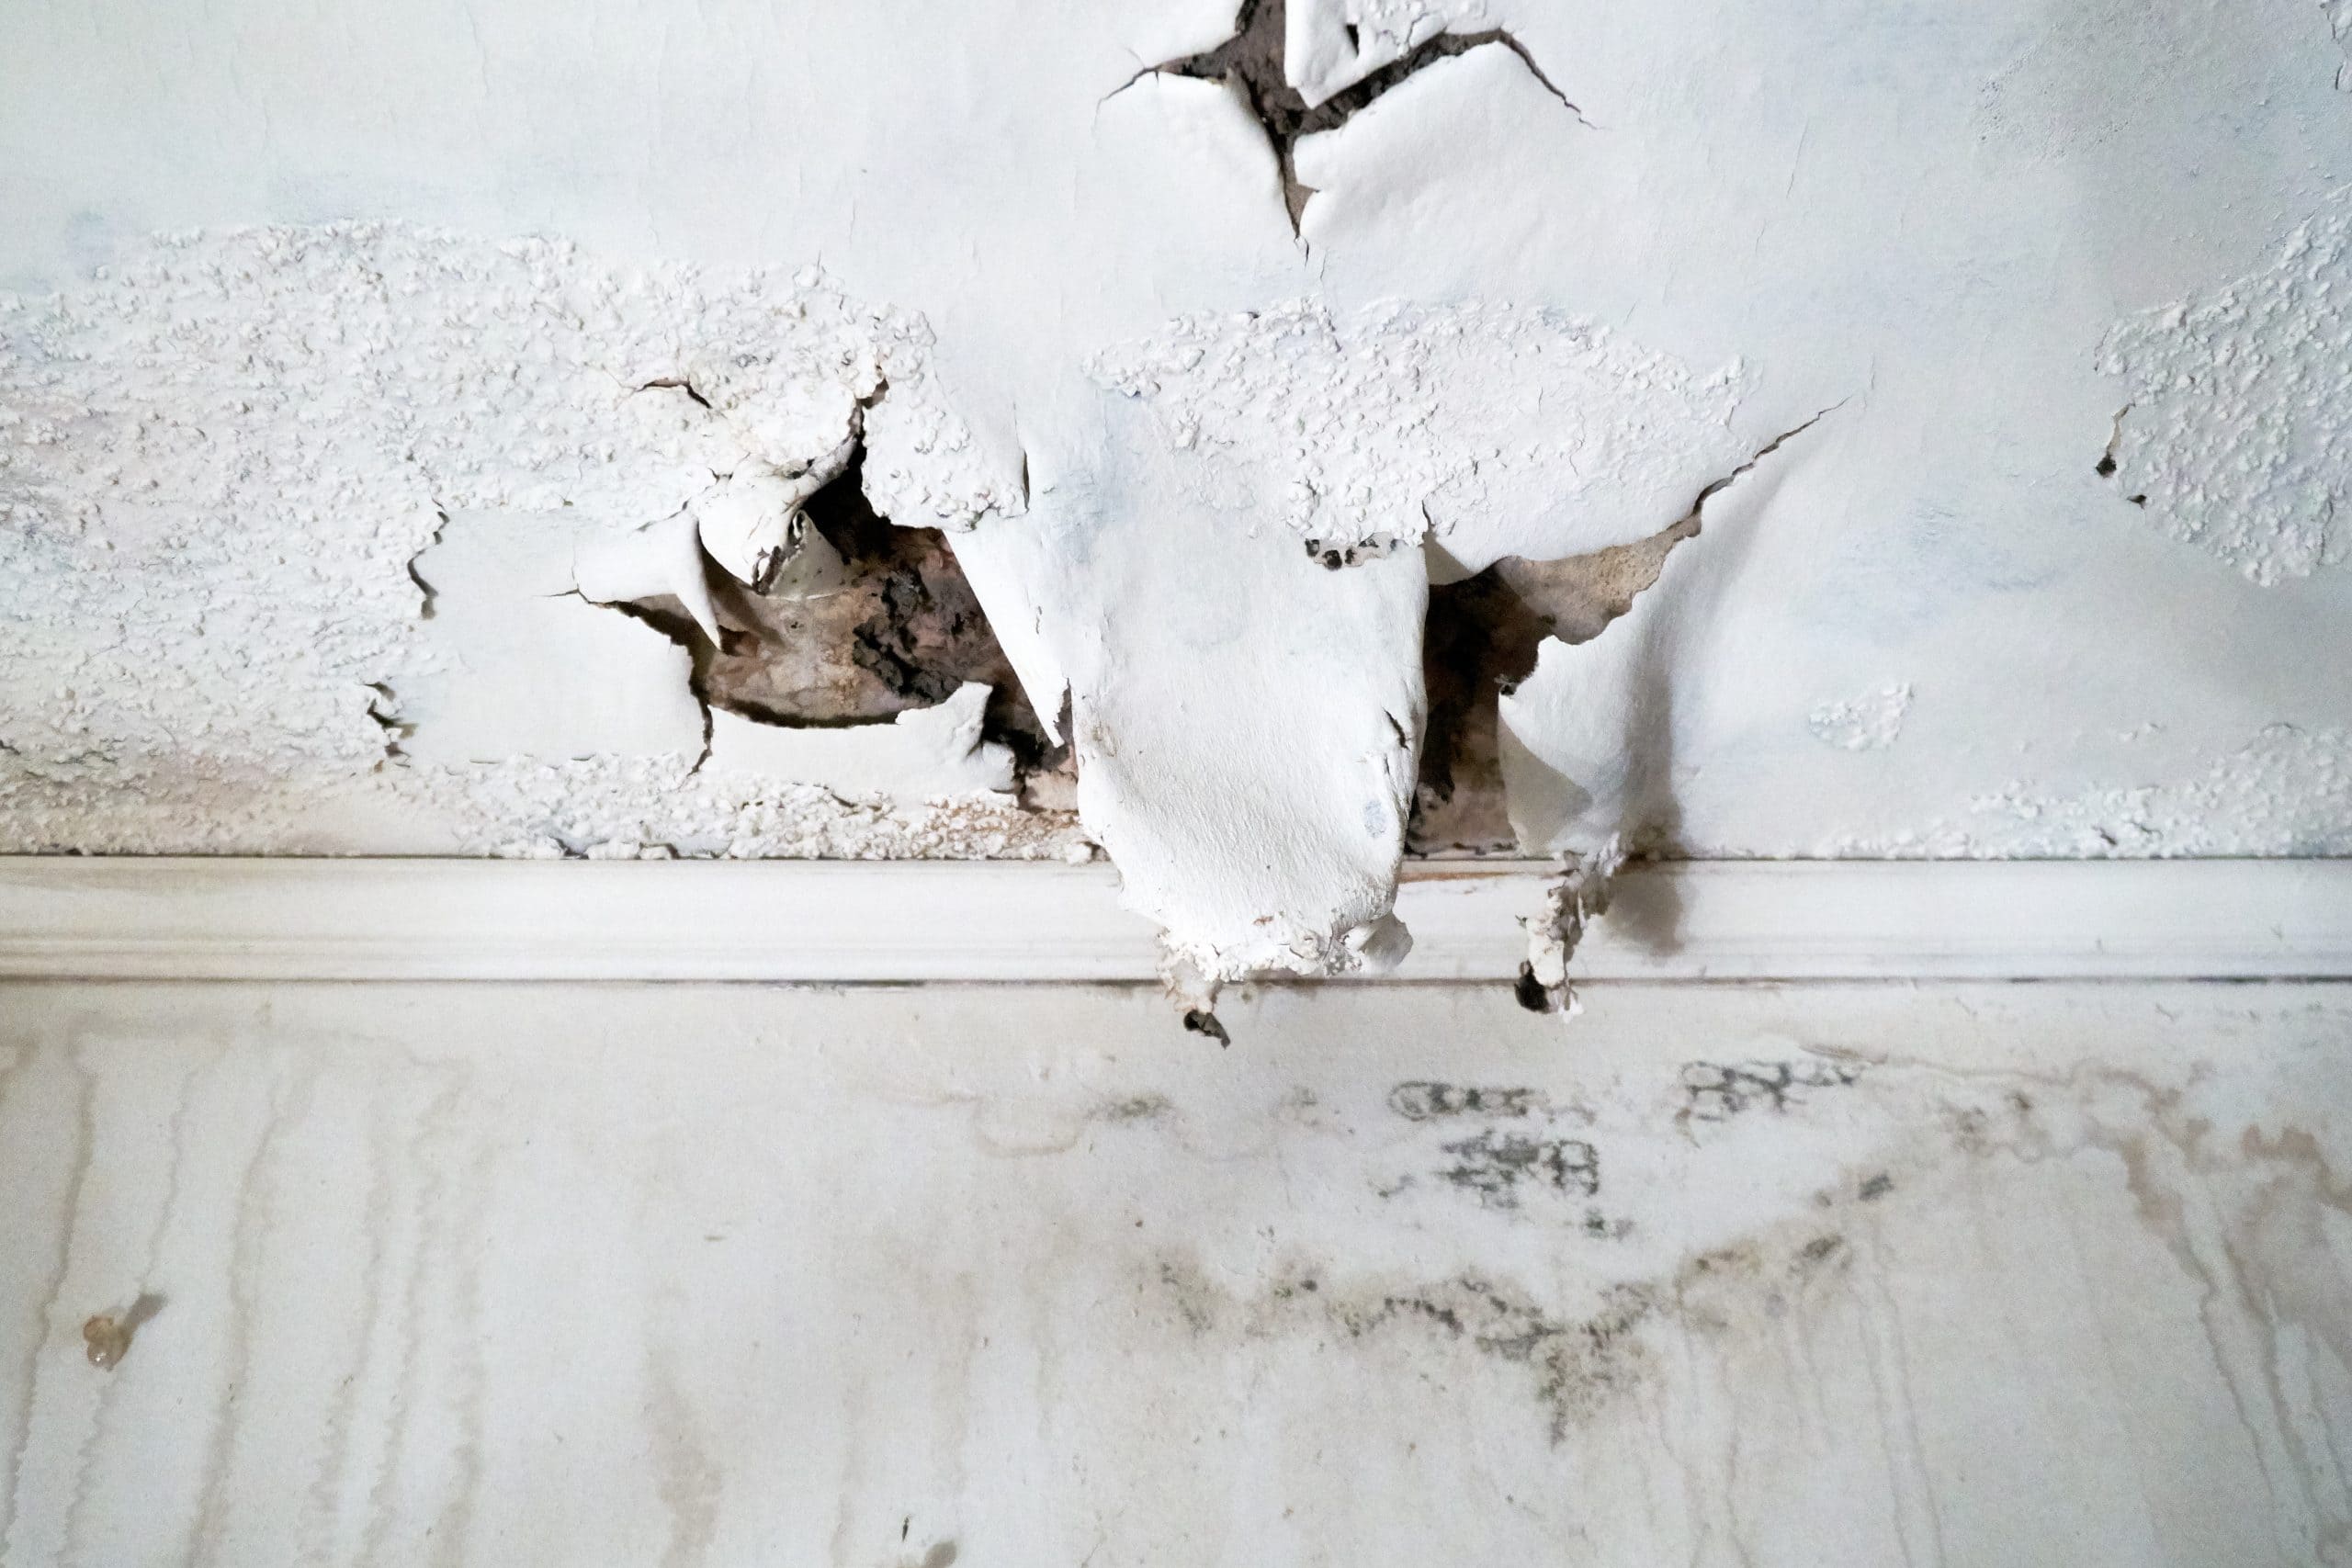 Medford Water Damage Repair Deals With Floods and Drywall